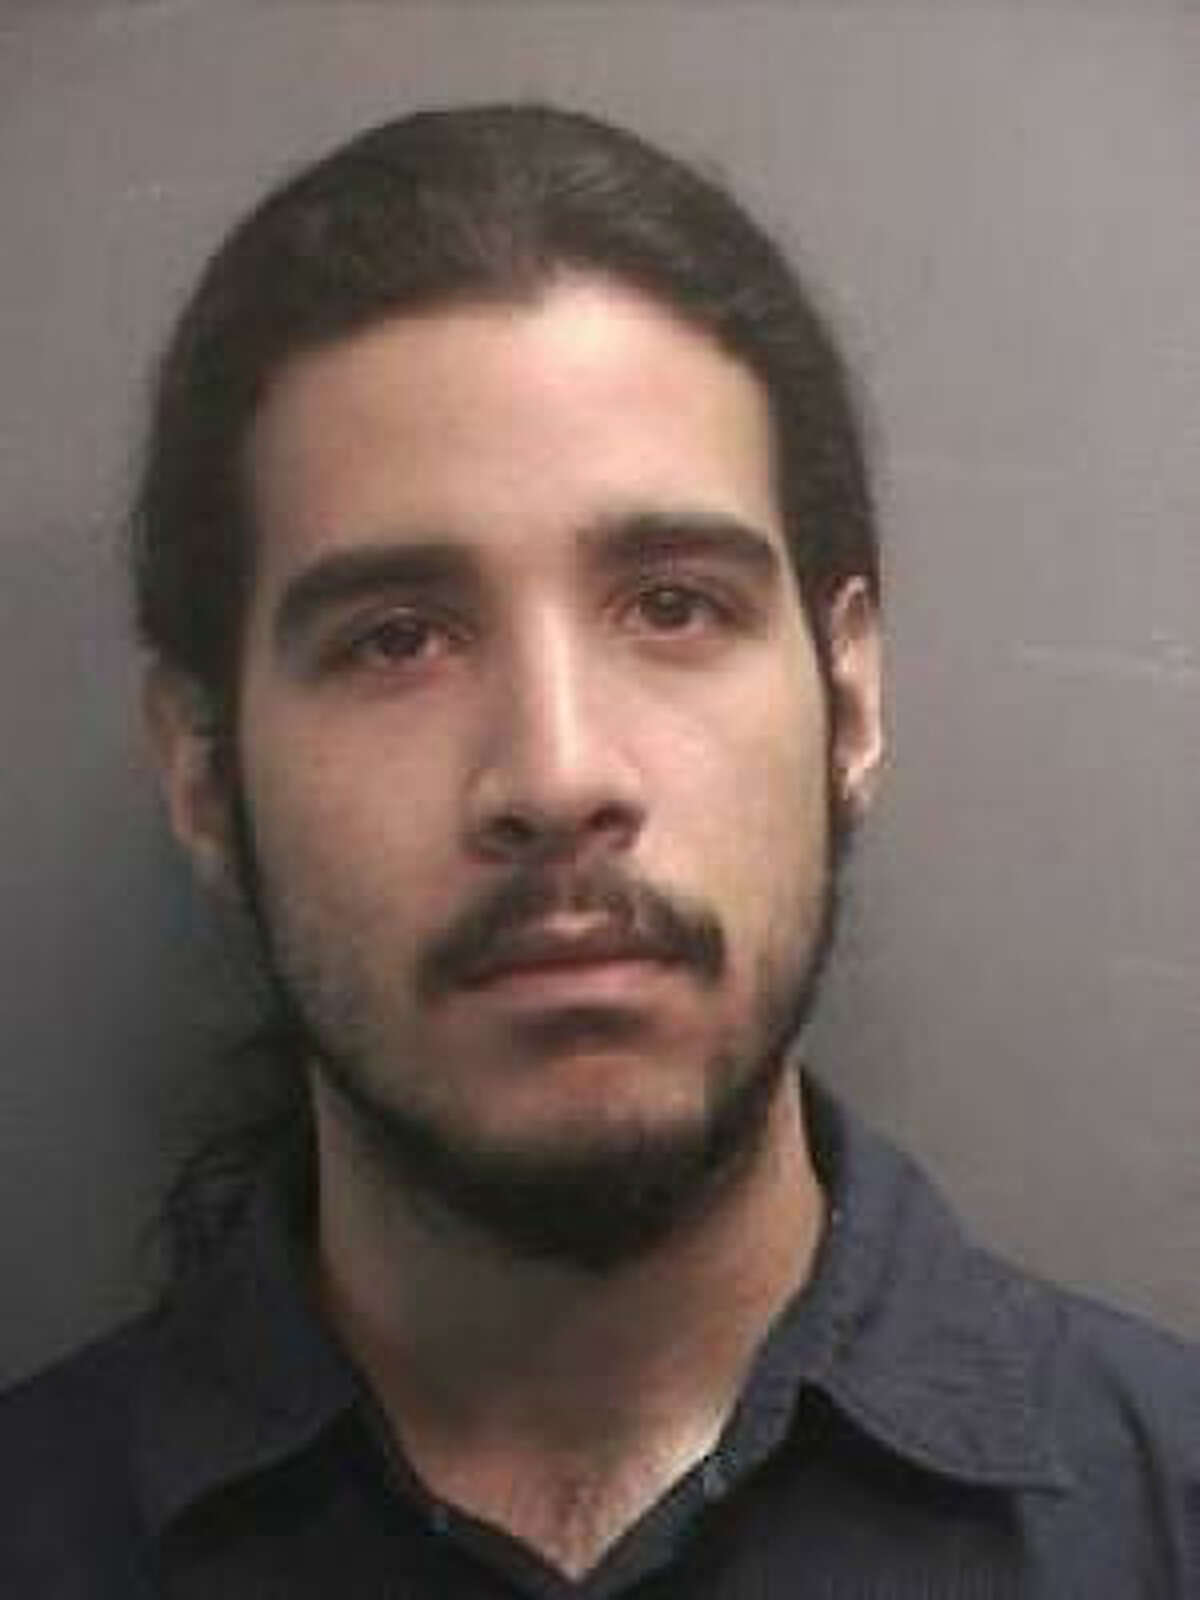 Authorities say Bryant Gerley Munoz was caught photographing up a woman's skirt.